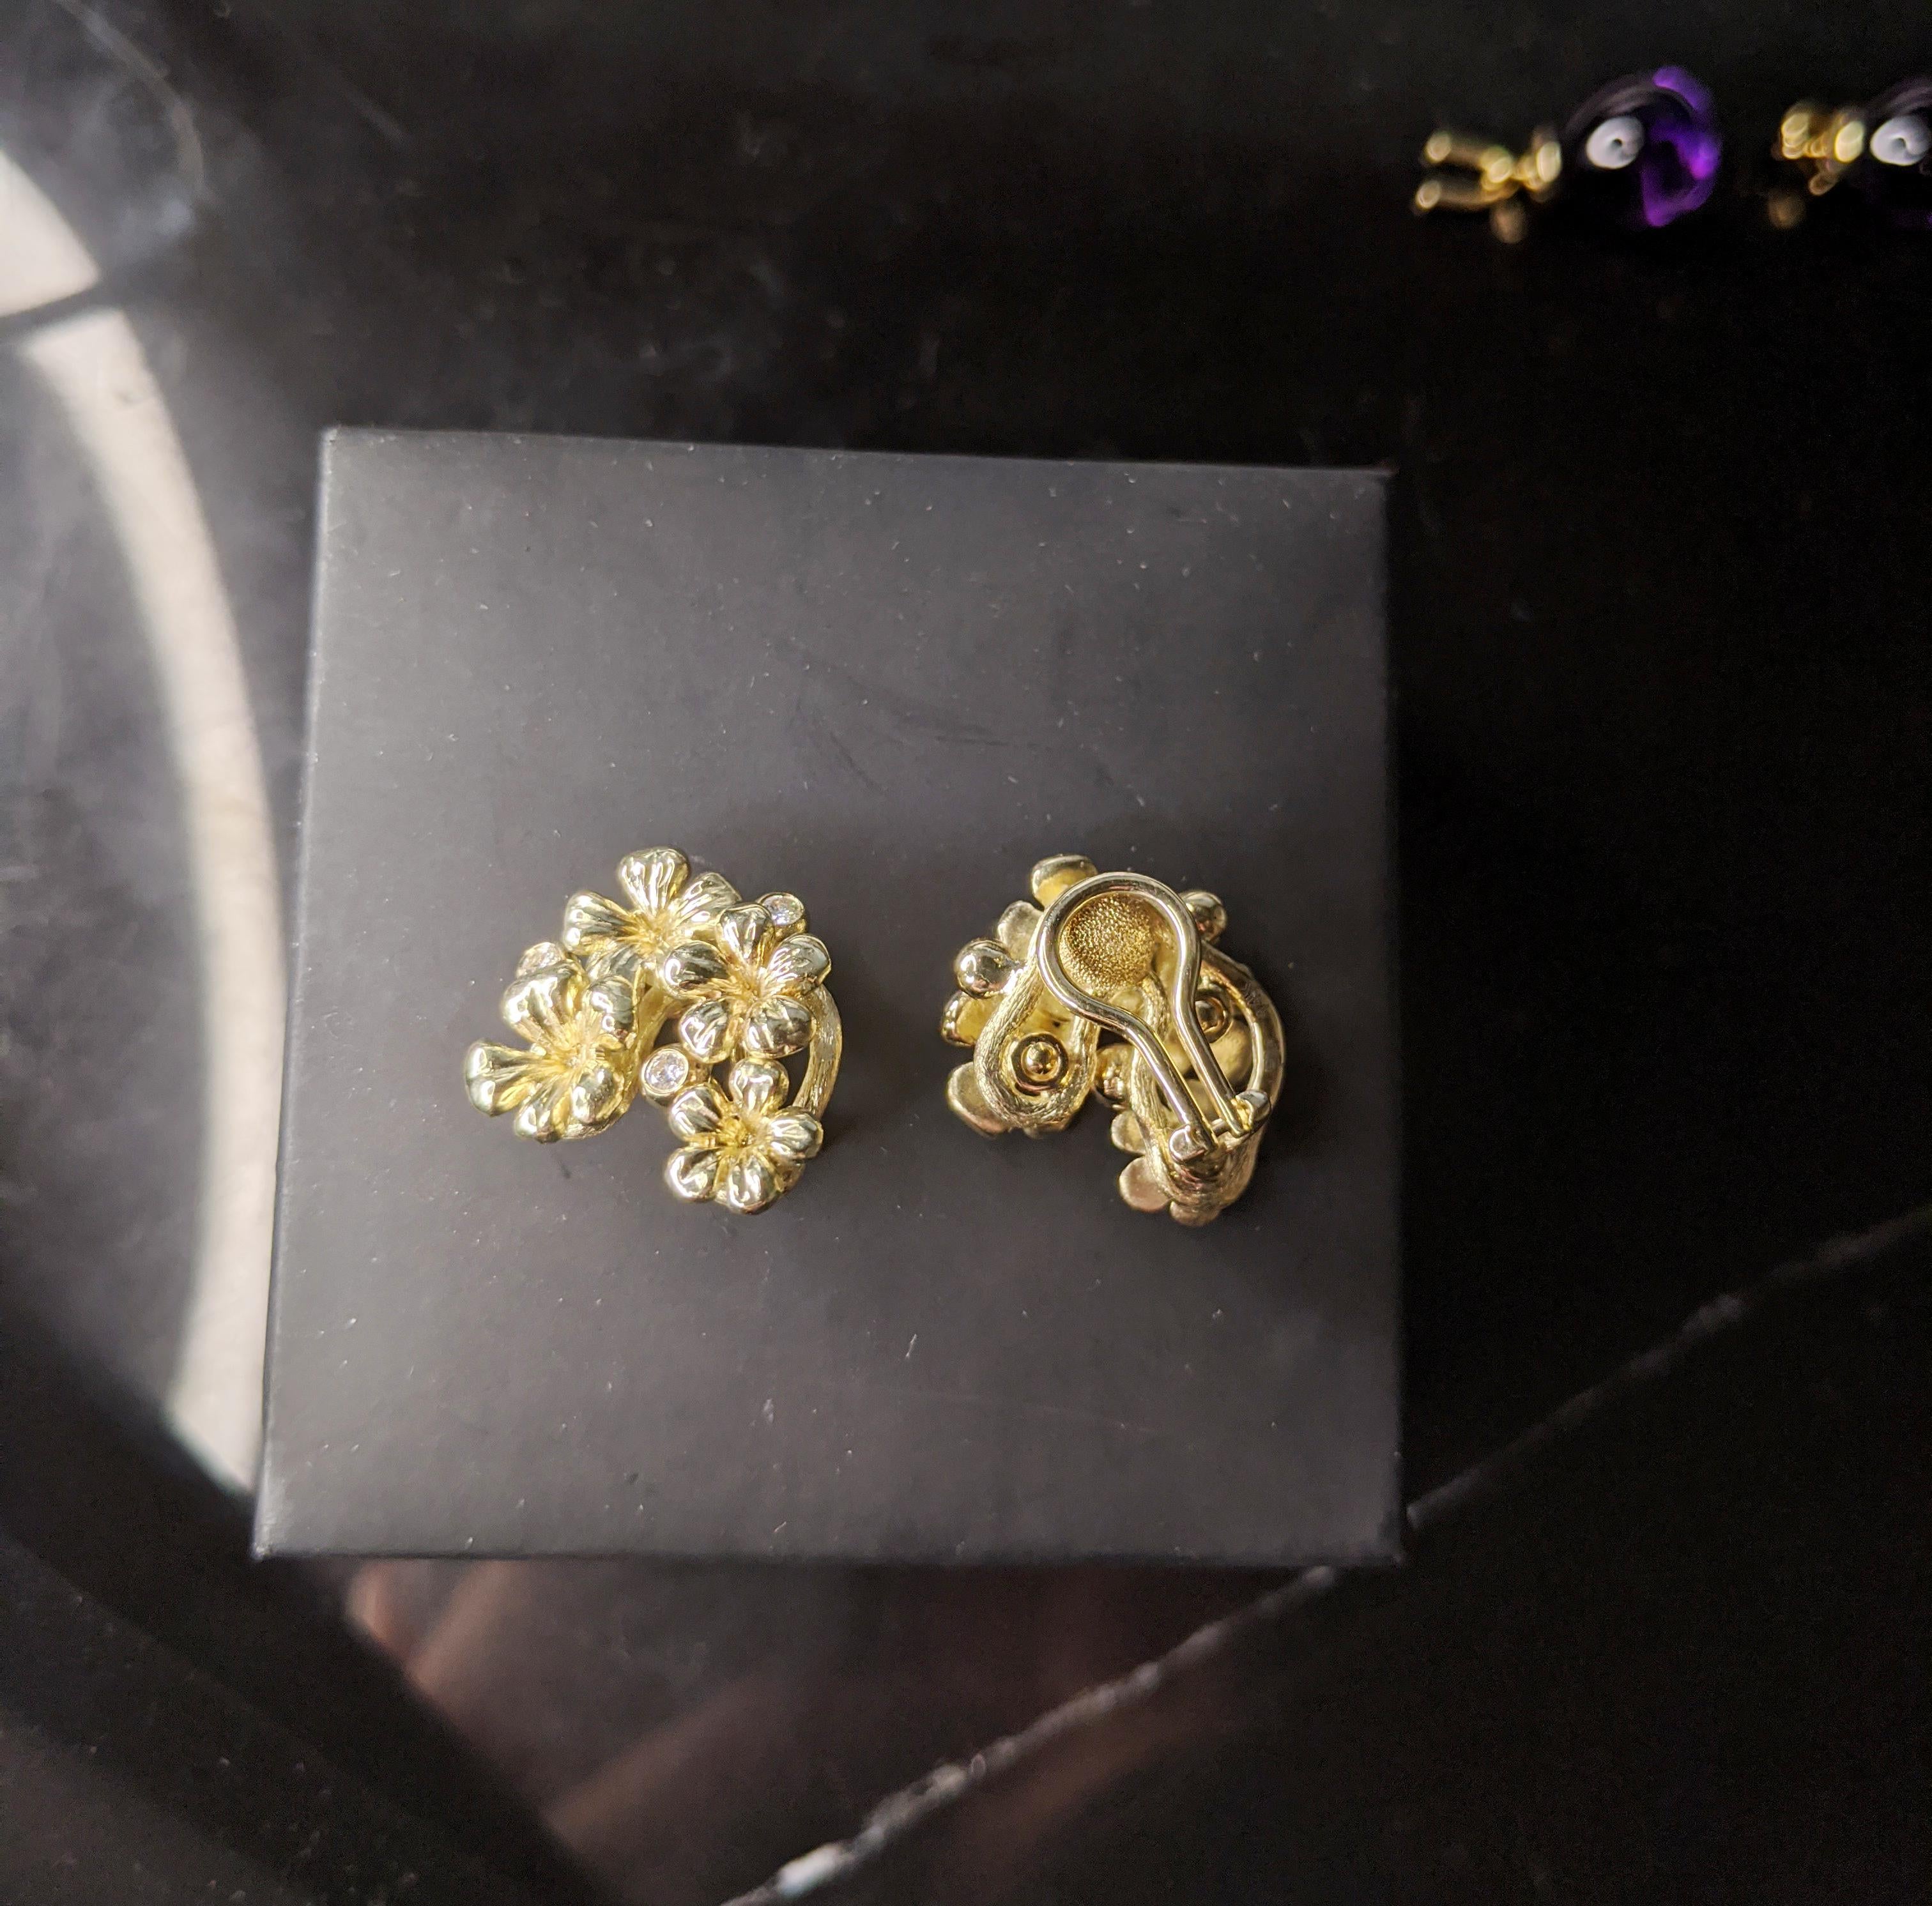 Eighteen Karat Gold Floral Earrings with Diamonds and Detachable Green Quartzes For Sale 5